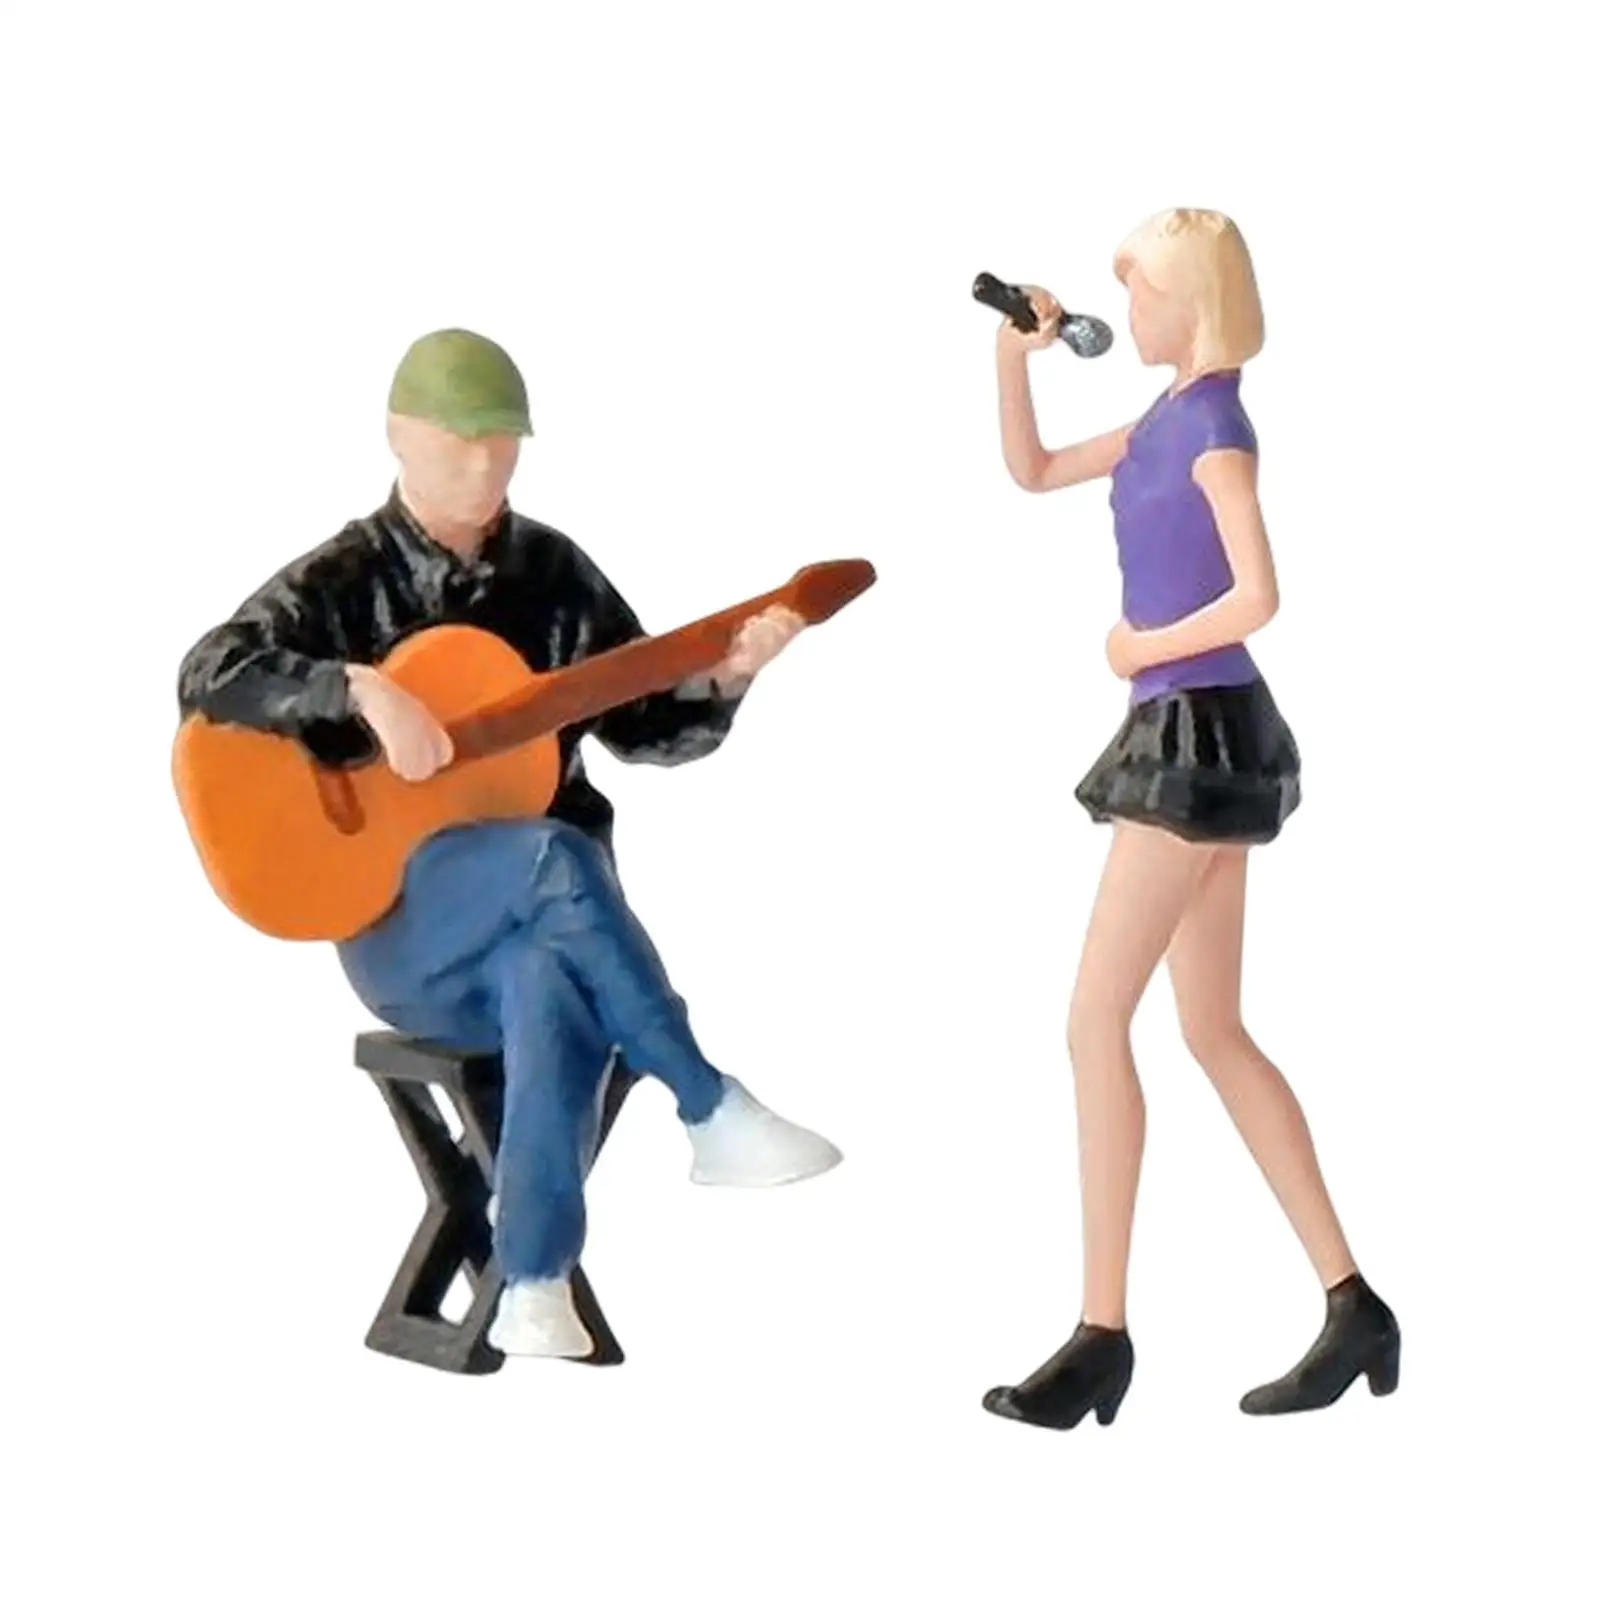 1:64 Guitarist and Singer Model Figures Miniature Street Singer Model Realistic for Micro Landscapes Accessories Decoration